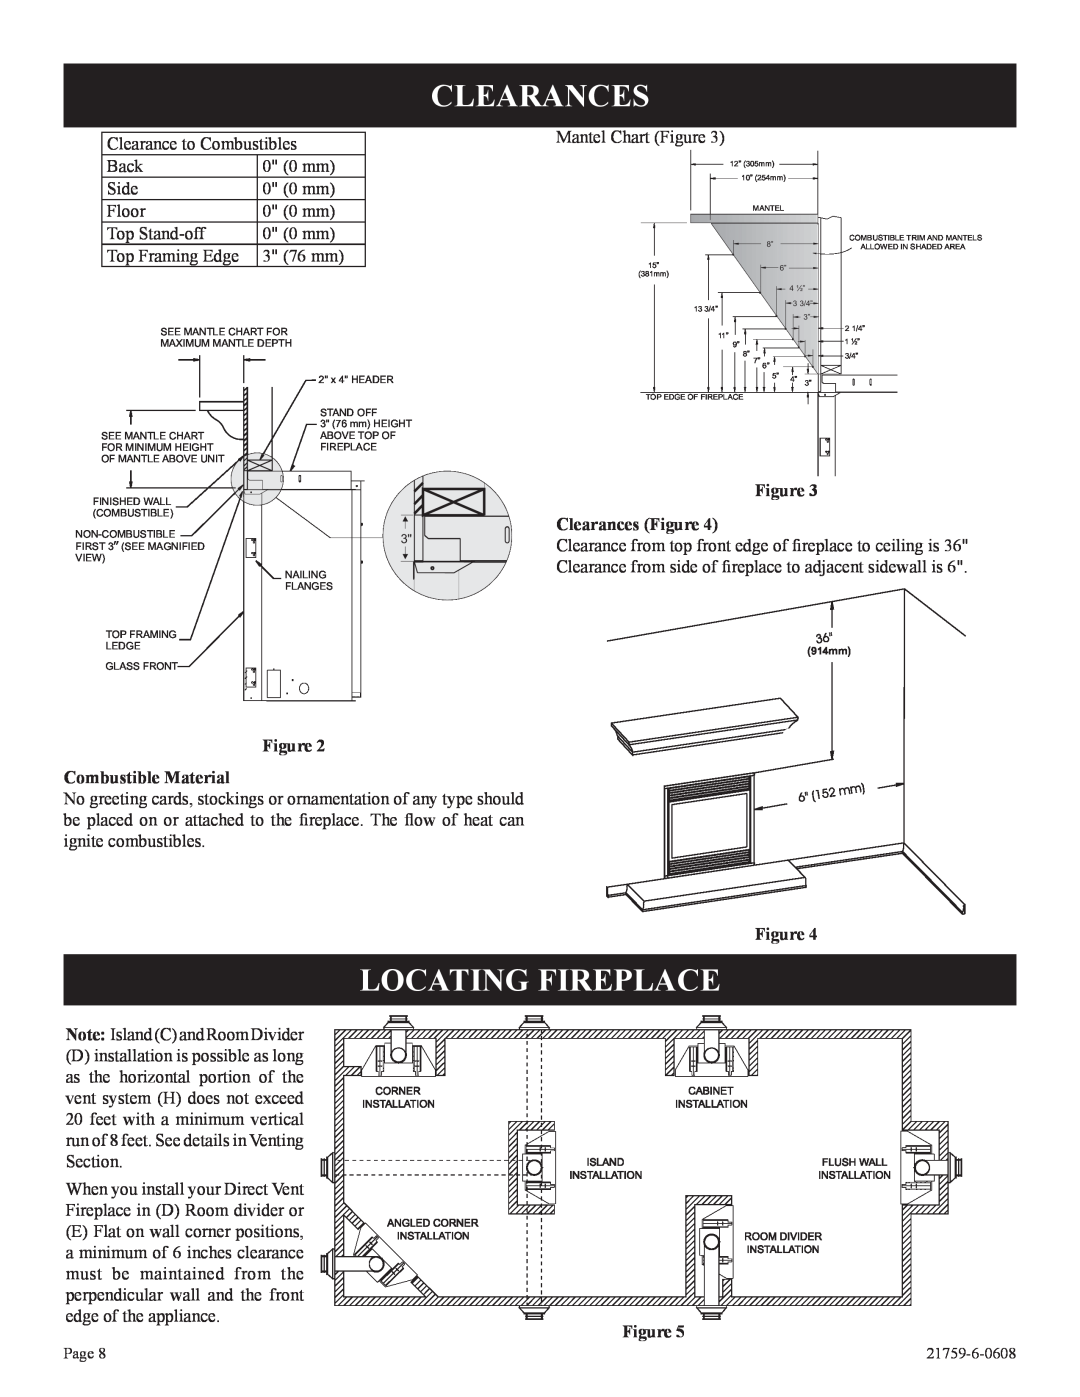 Empire Comfort Systems P)-2, DVP42FP Locating Fireplace, Figure Clearances Figure, Figure Combustible Material 